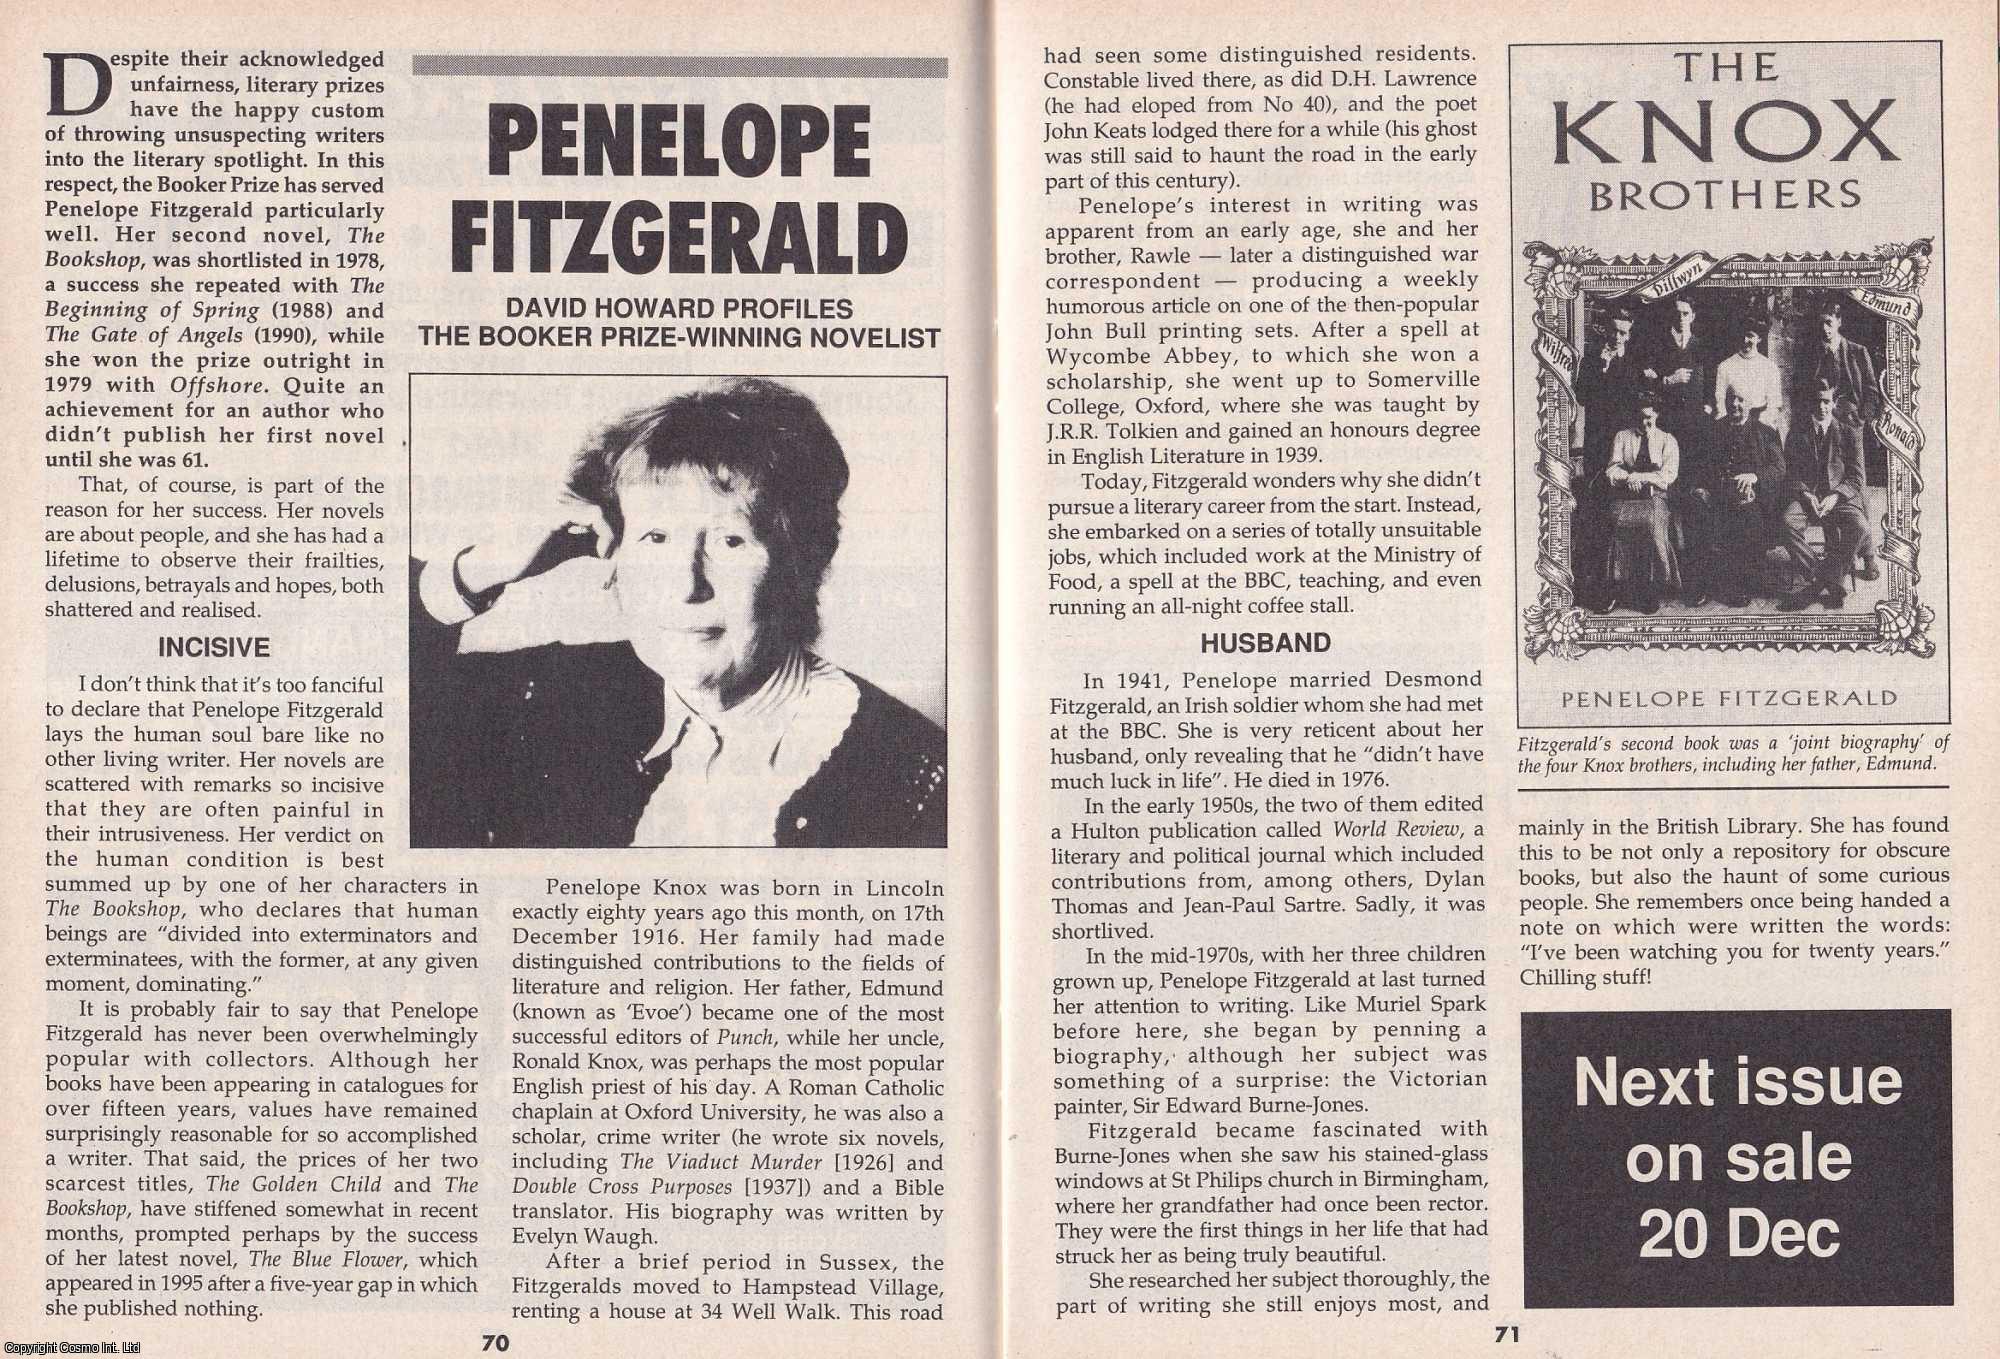 David Howard - Penelope Fitzgerald. Profiling The Booker Prize-Winning Novelist. This is an original article separated from an issue of The Book & Magazine Collector publication.